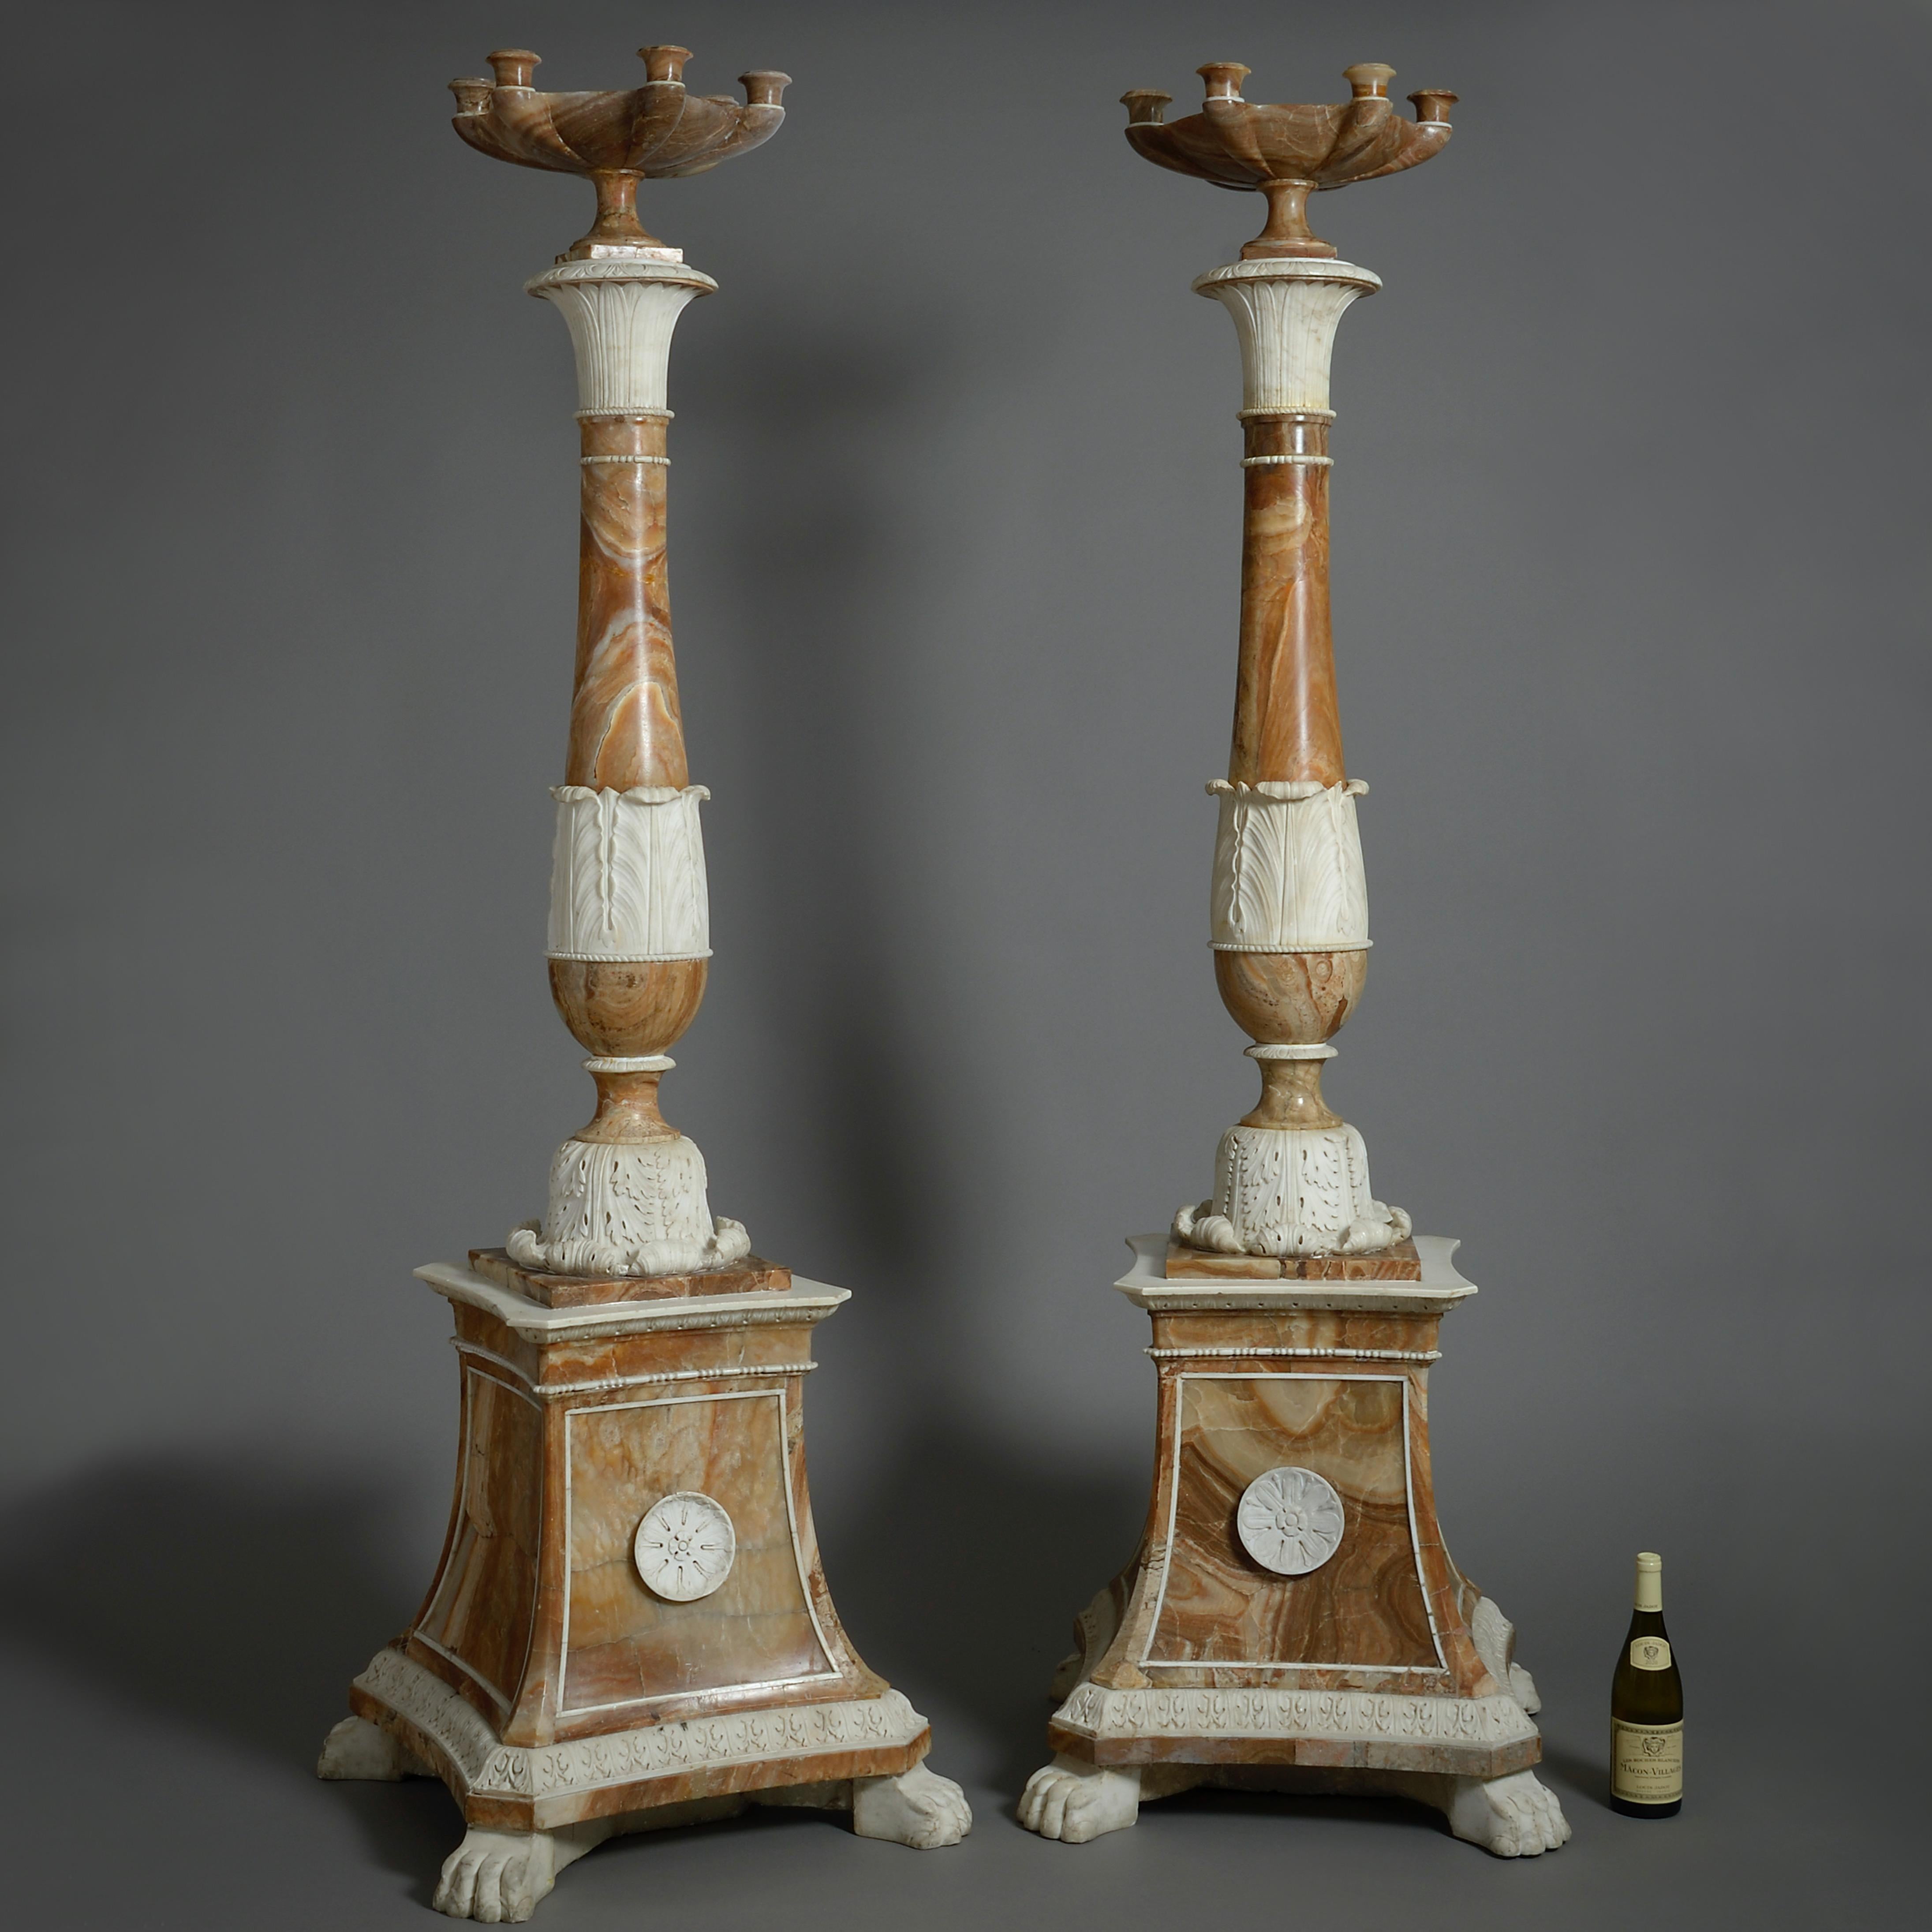 A MAGNIFICENT AND MASSIVE PAIR OF ROMAN STATUARY MARBLE AND TUSCAN ALABASTER TORCHERES, CIRCA 1800.

Each with a six-light tazza form candelabrum atop a shaped column with stiff-leaf capital and acanthus-carved socle on a panelled square spreading